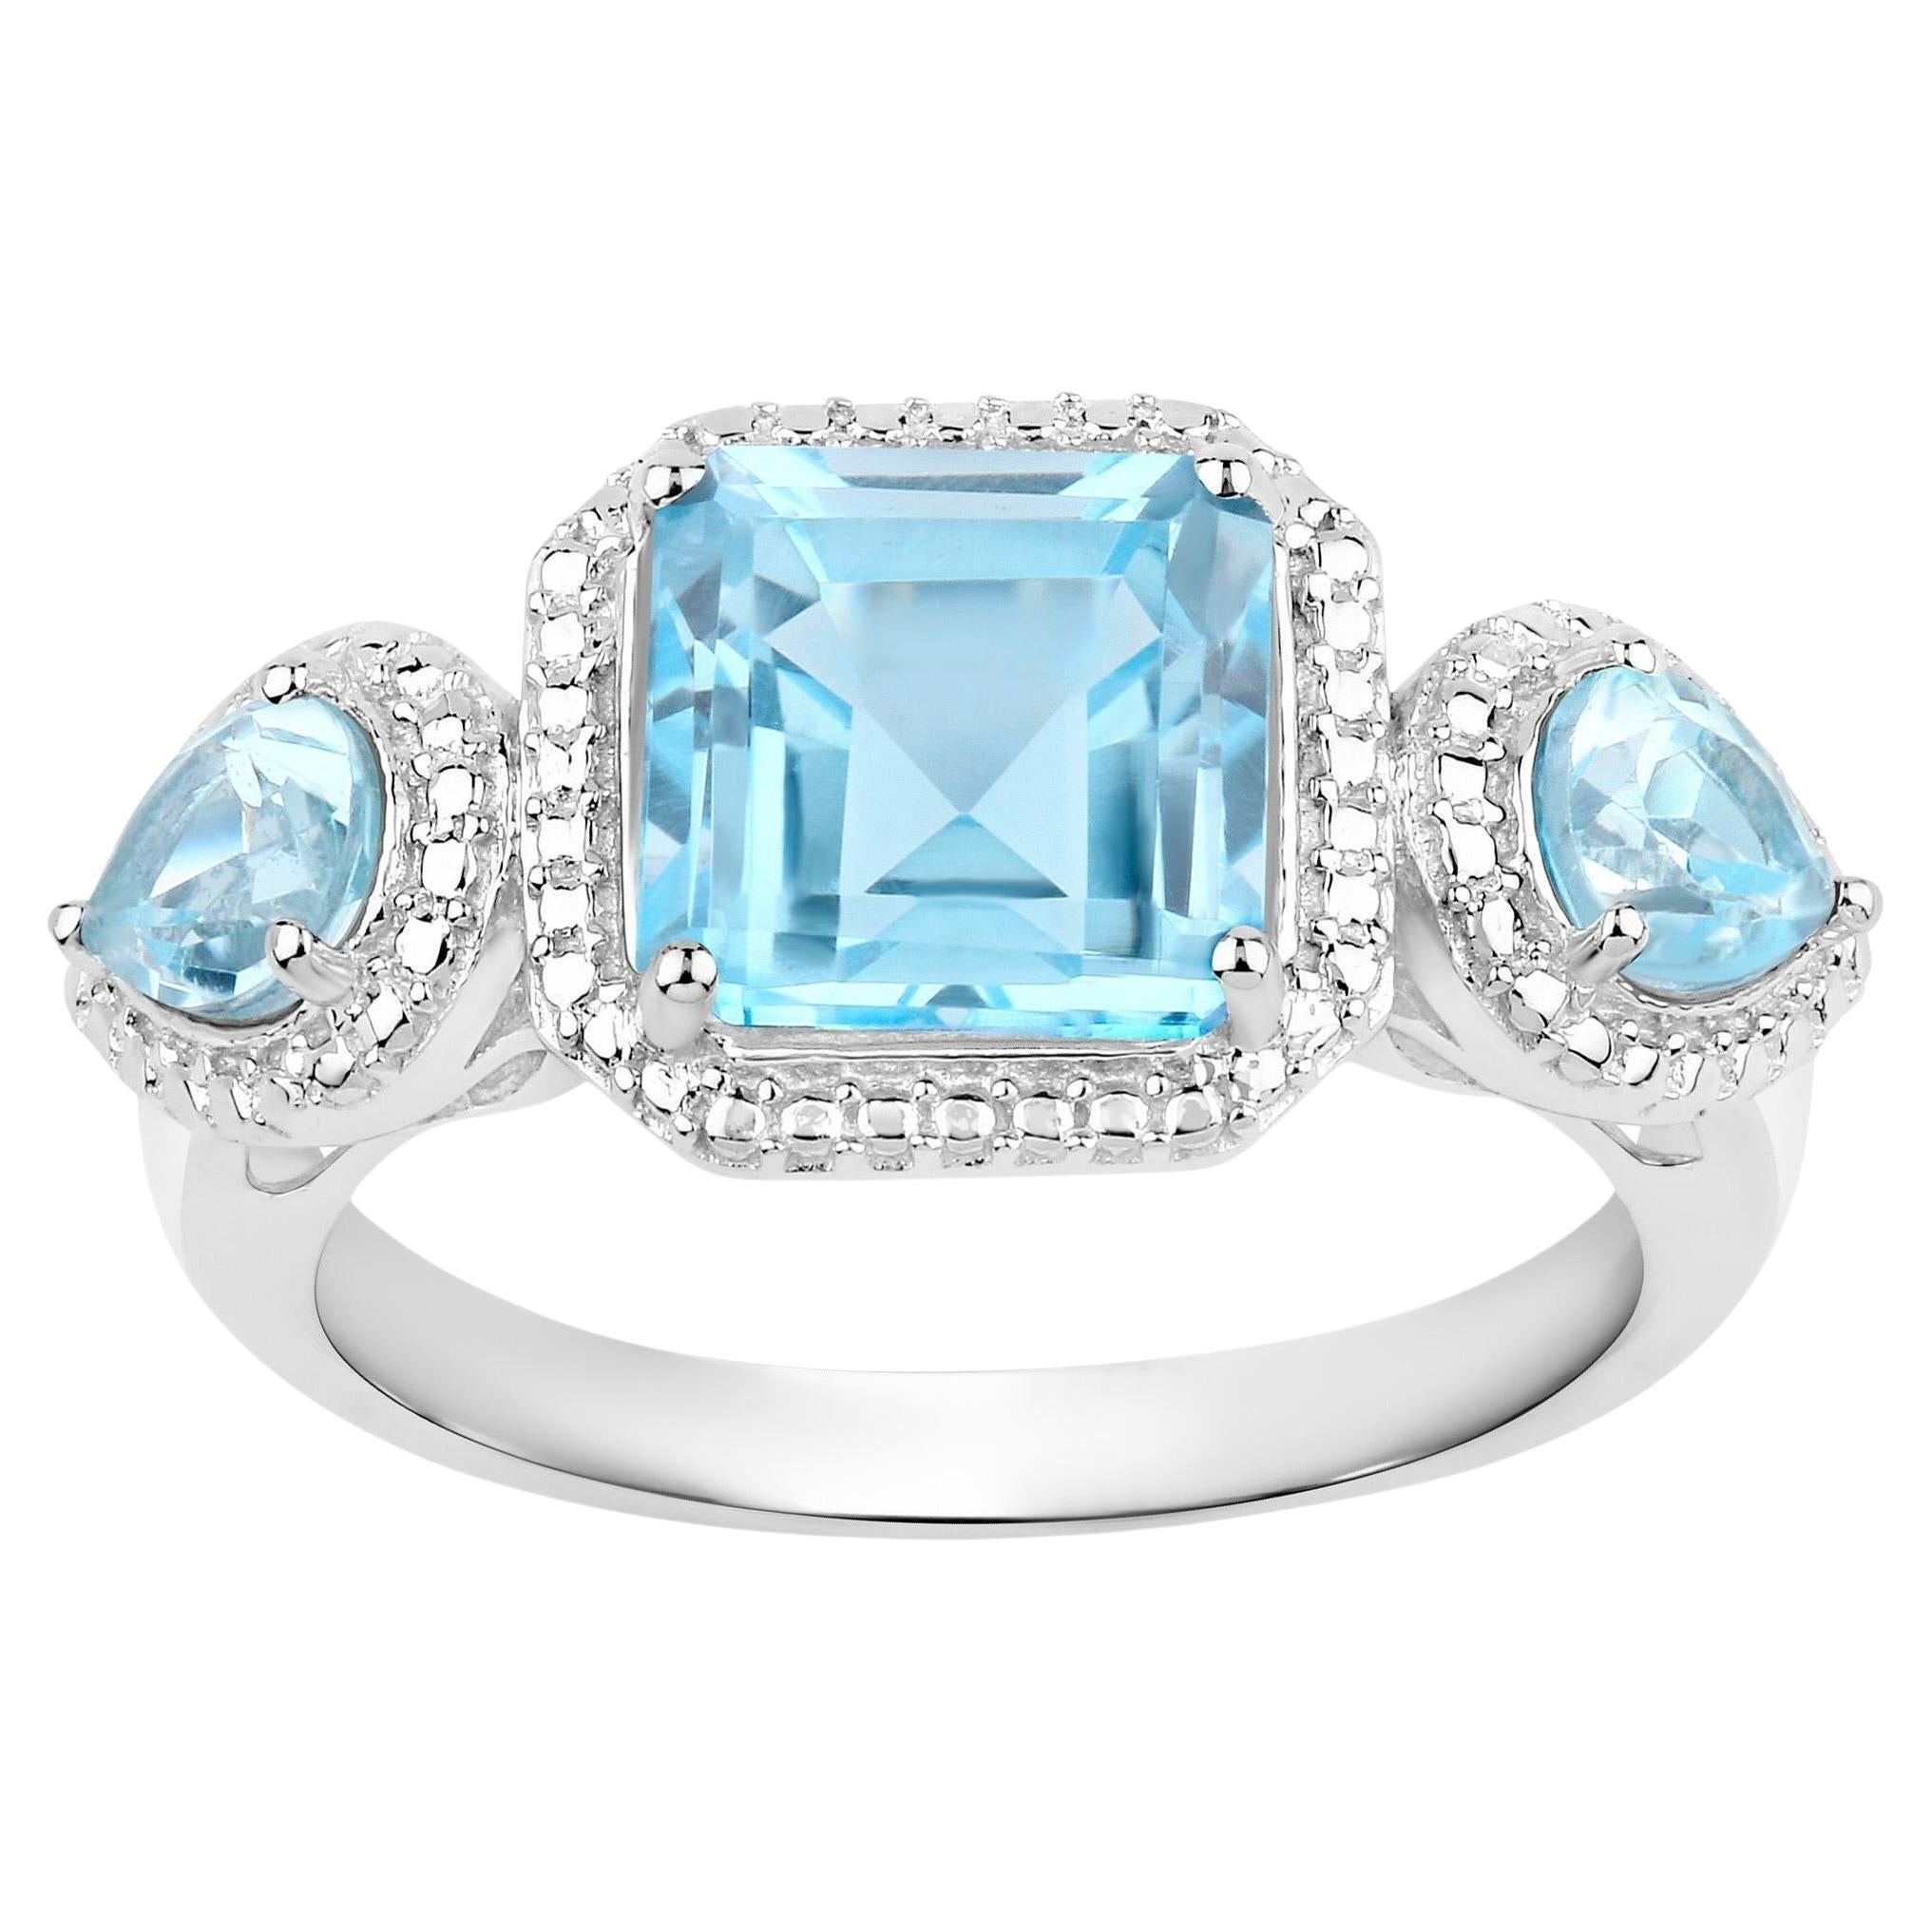 Blue Topaz Three Stone Ring 3.85 Carats Sterling Silver For Sale